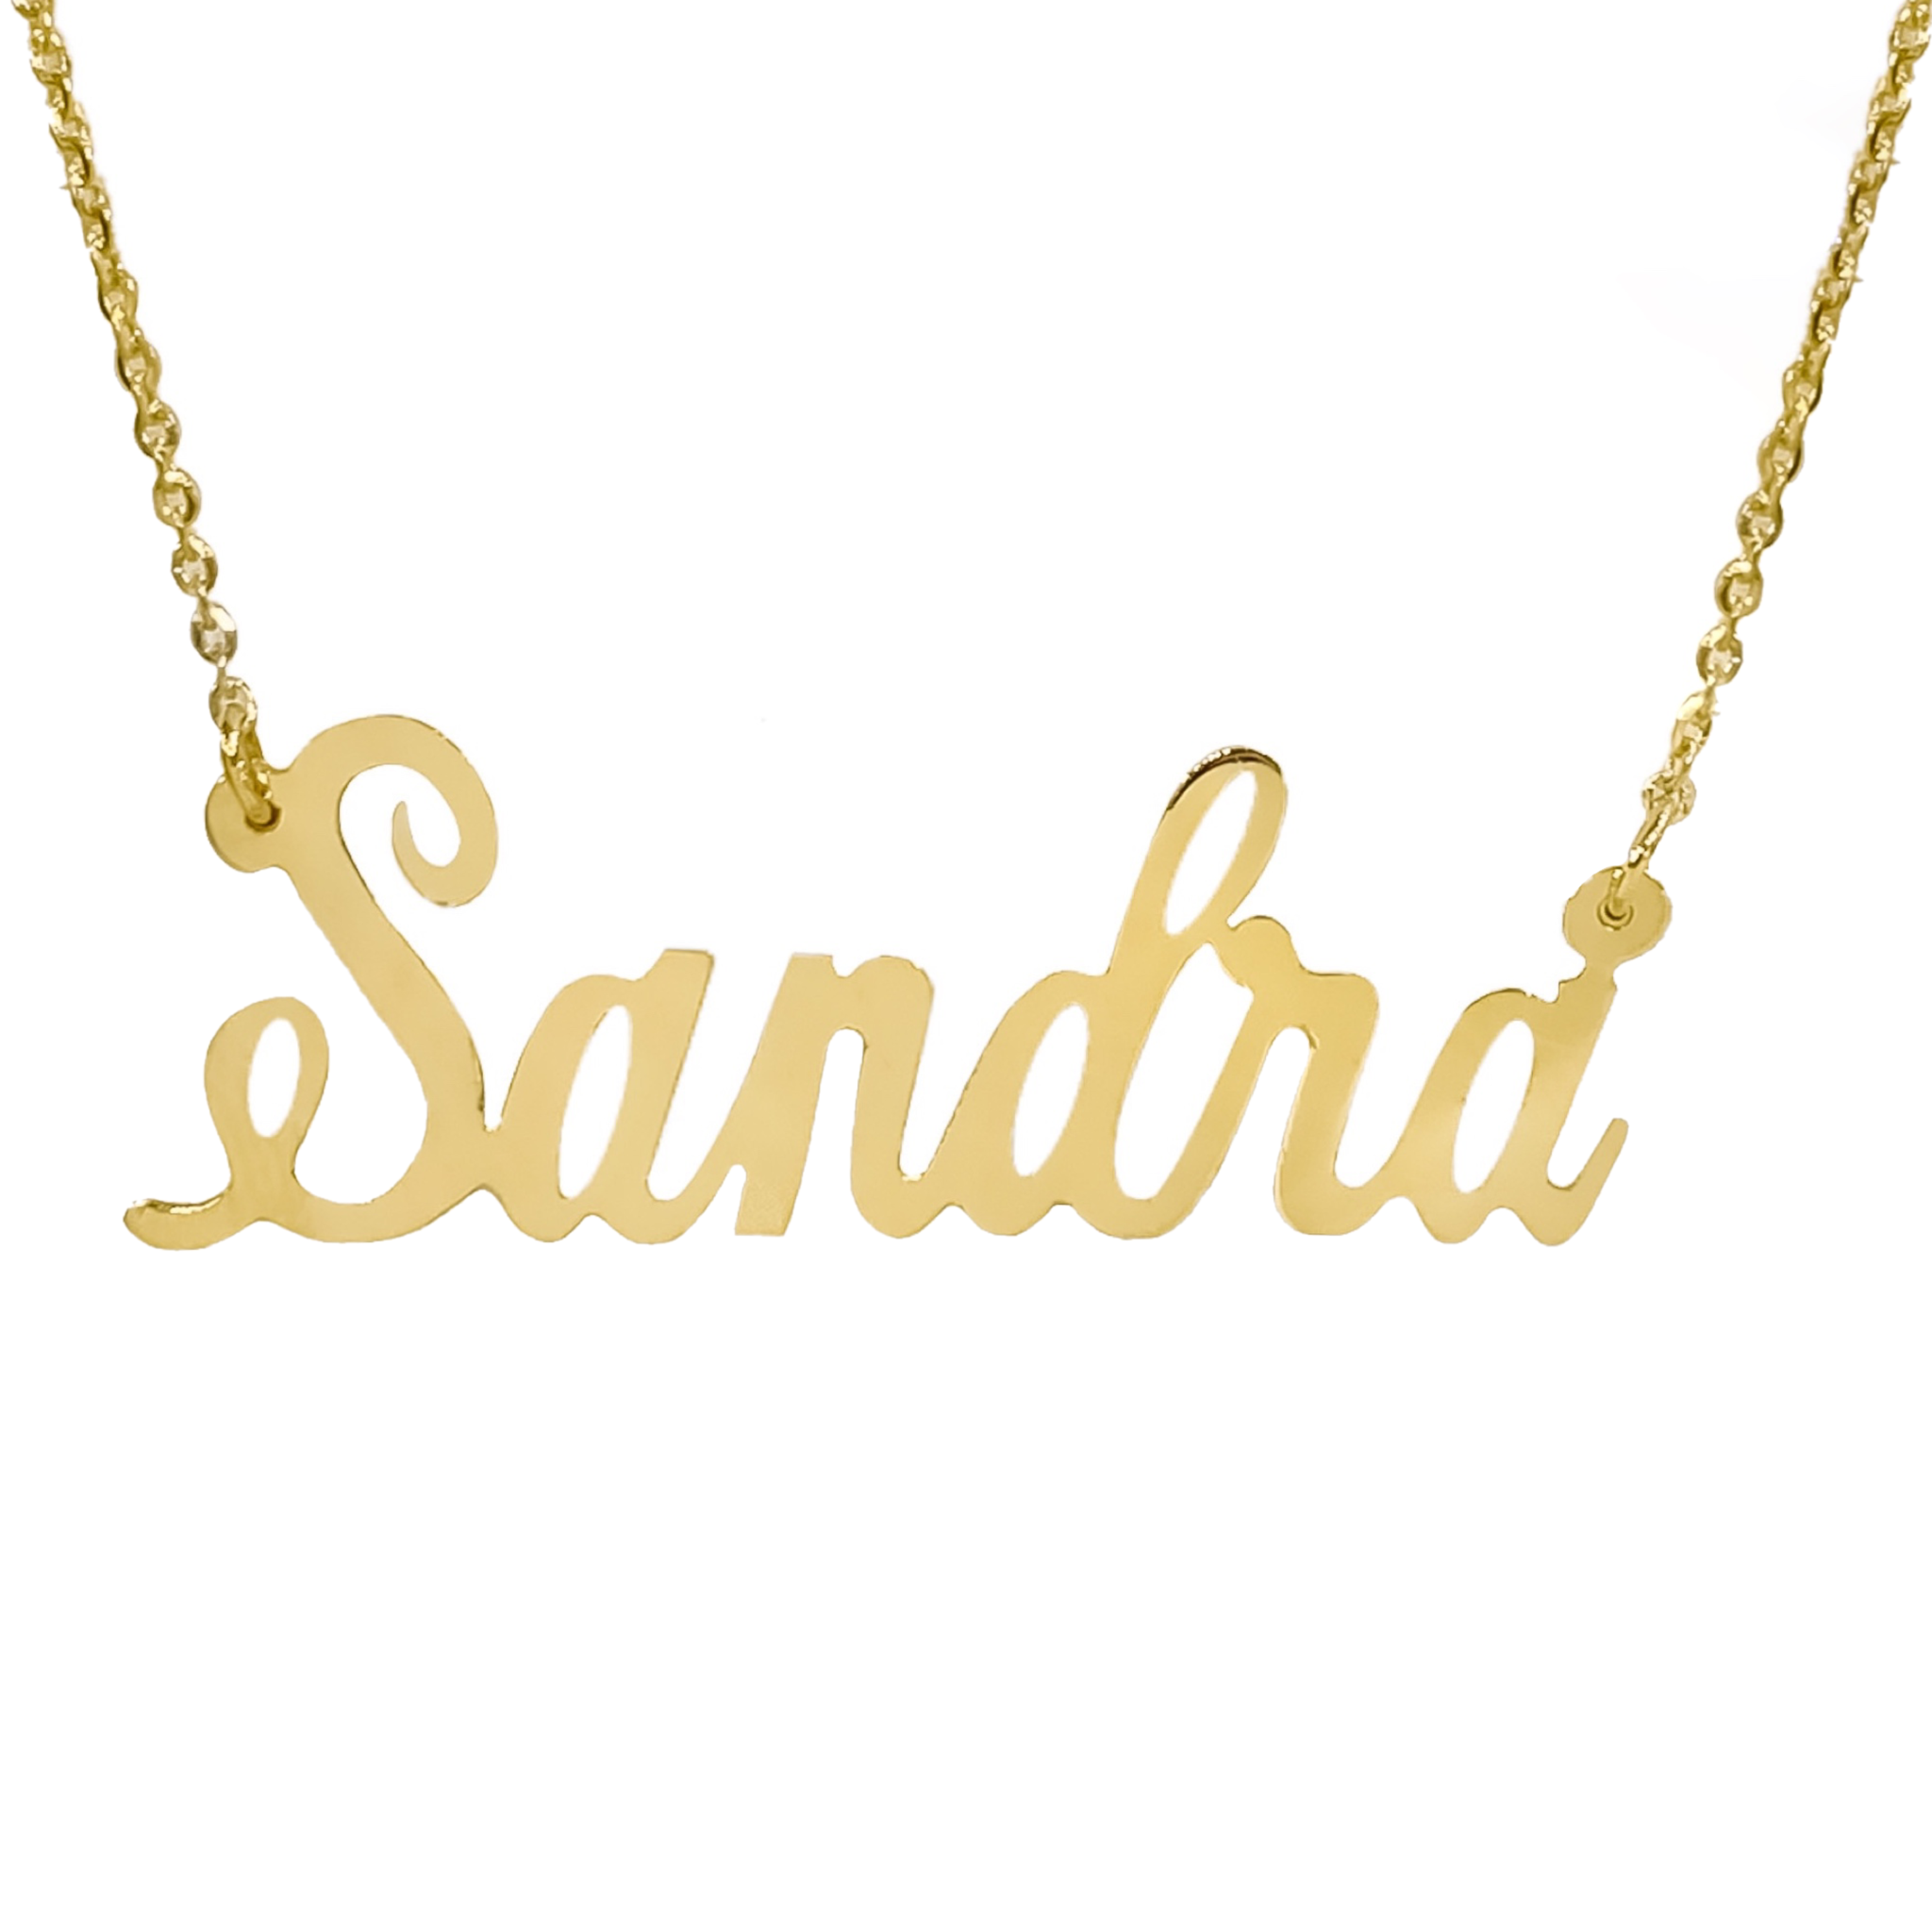 14K YELLOW GOLD CALLIGRAPHY FLOATING NAME NECKLACE